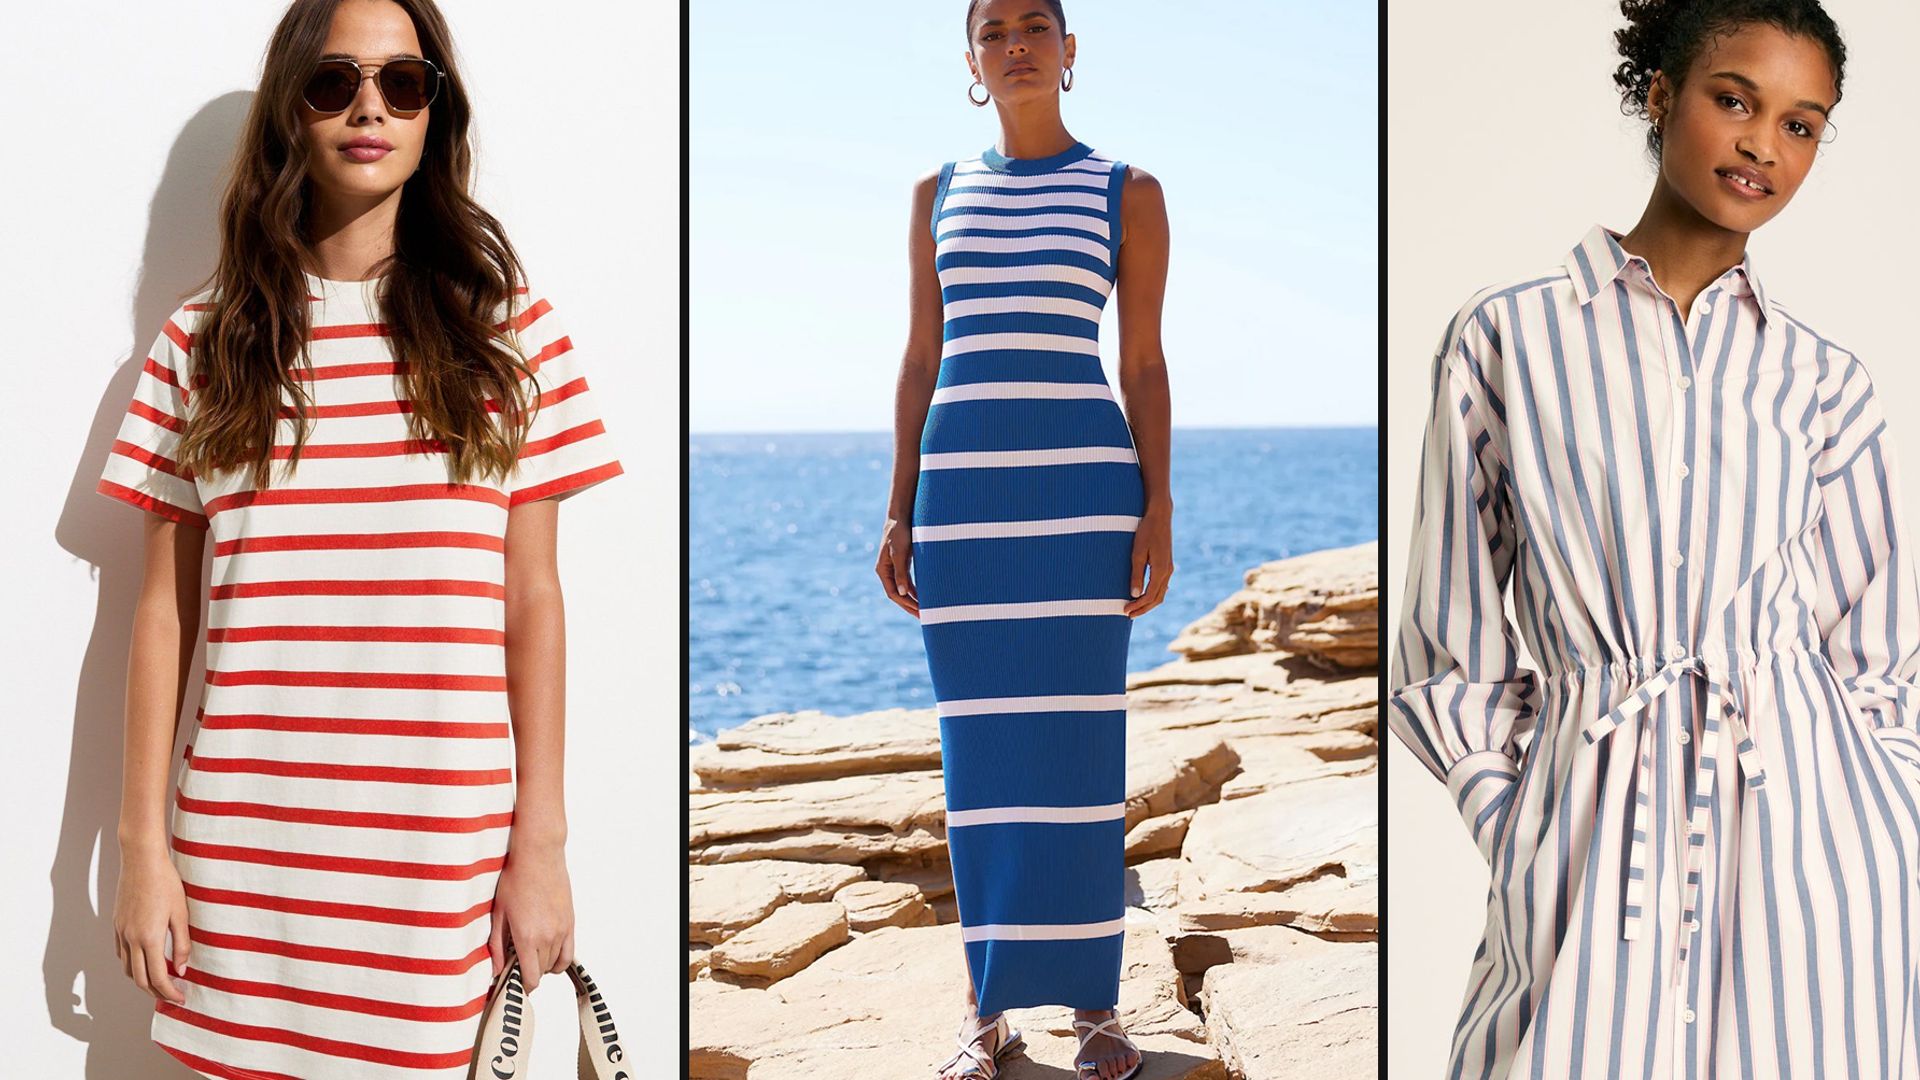 Striped dresses are trending for summer: 8 best styles to shop now